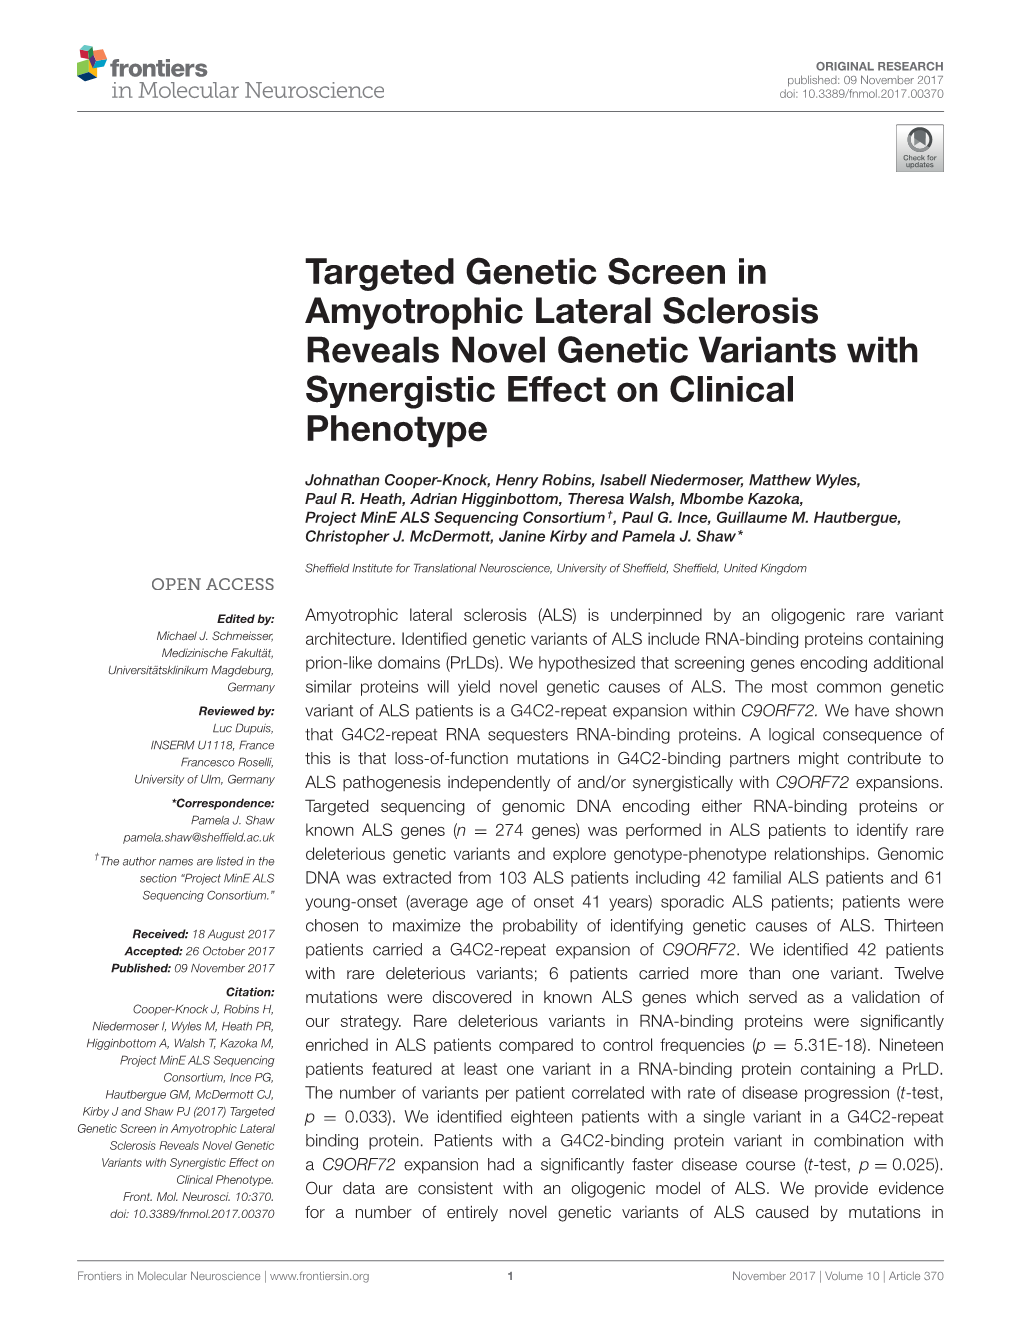 Targeted Genetic Screen in Amyotrophic Lateral Sclerosis Reveals Novel Genetic Variants with Synergistic Effect on Clinical Phenotype